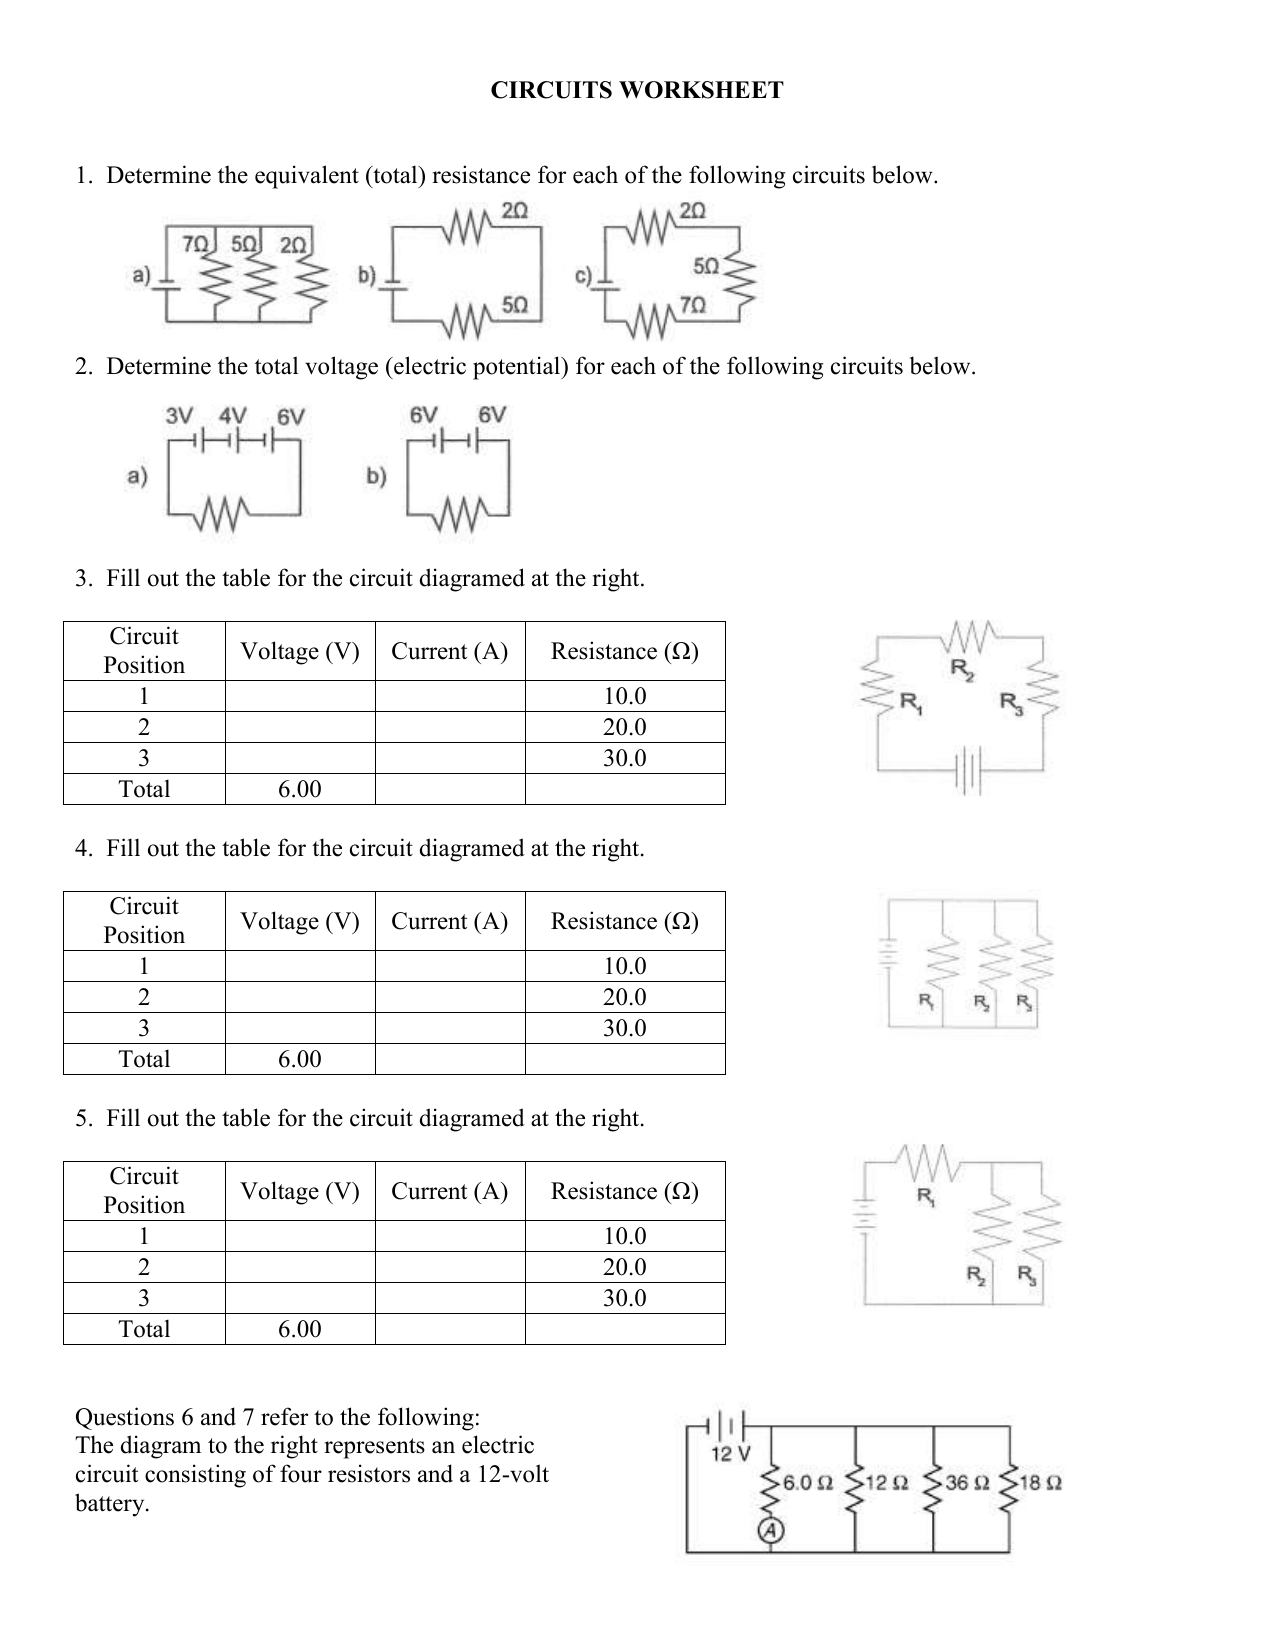 parallel-circuit-worksheet-1-answers-free-download-qstion-co